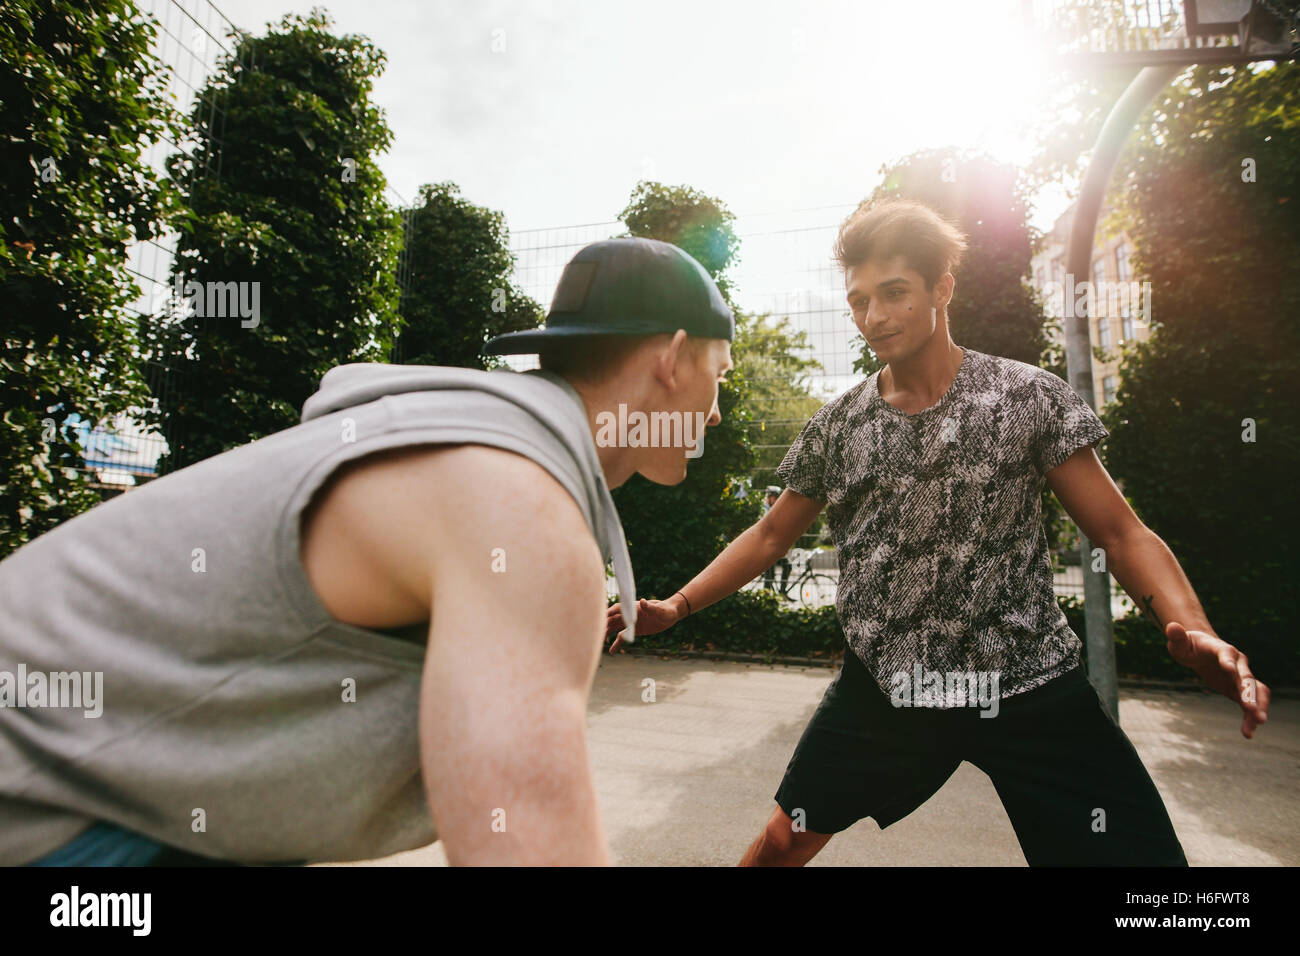 Outdoor shot of two teenage friends playing basketball. Two young men playing basketball on court outdoors. Stock Photo